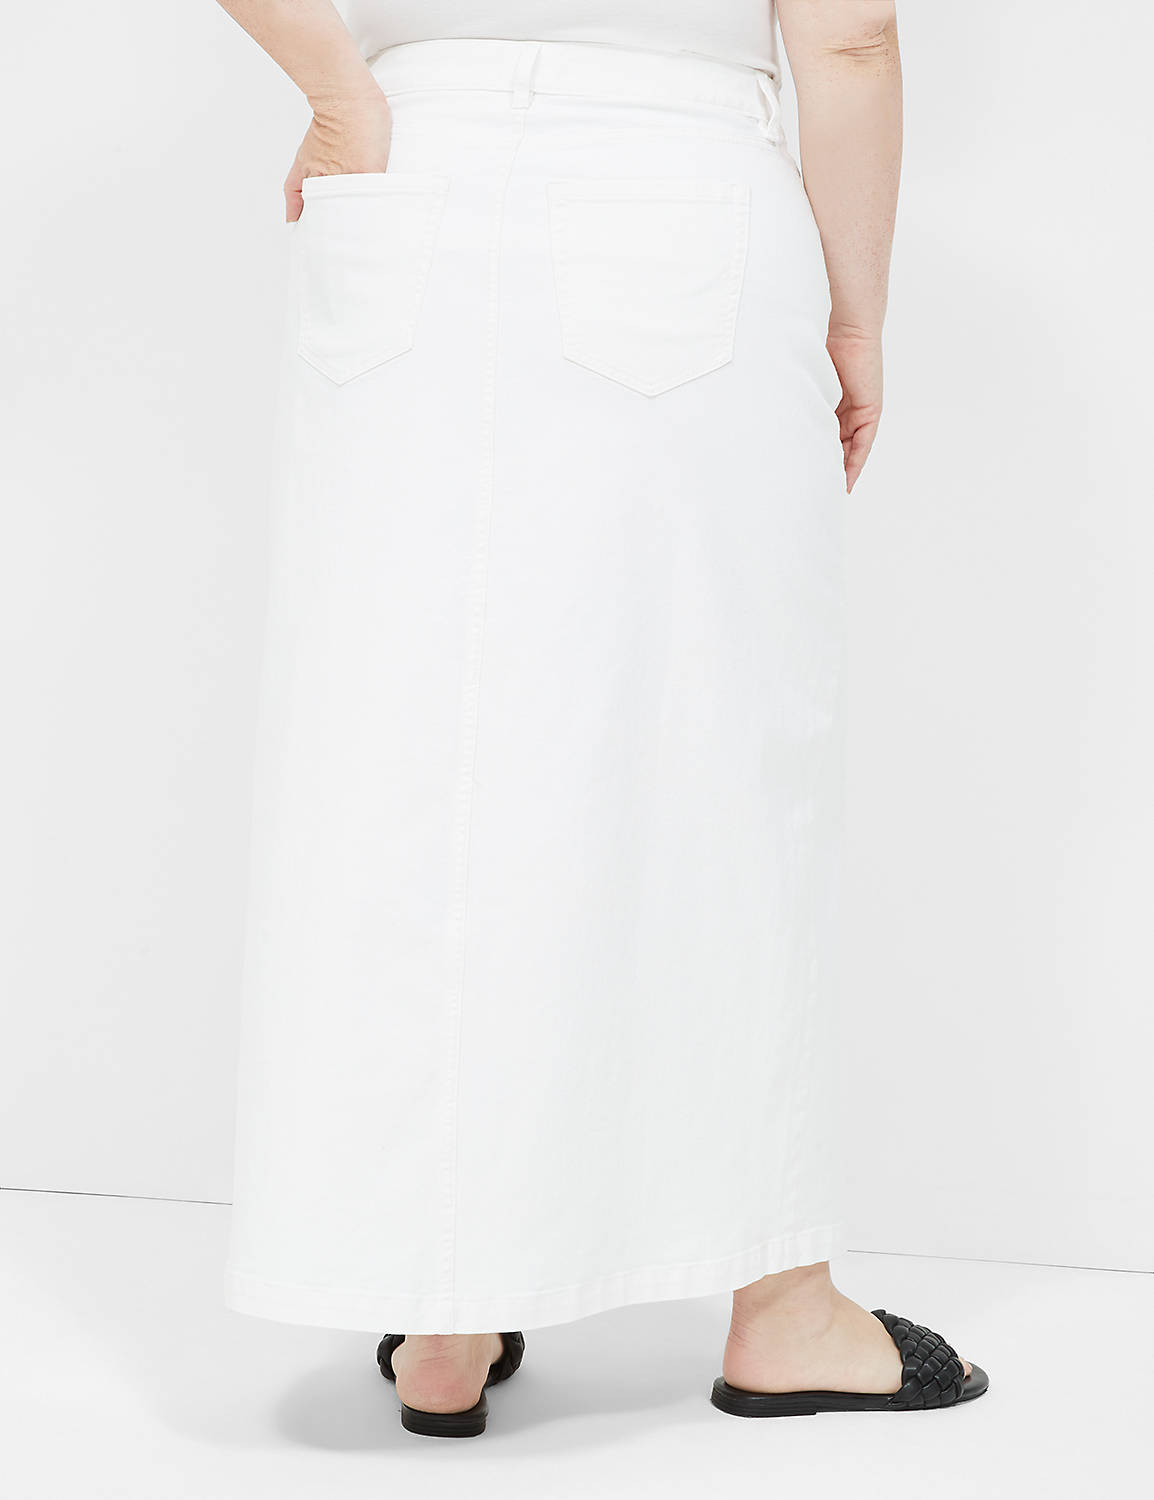 DENIM MAXI SKIRT HIGH RISE- FRONT S Product Image 2